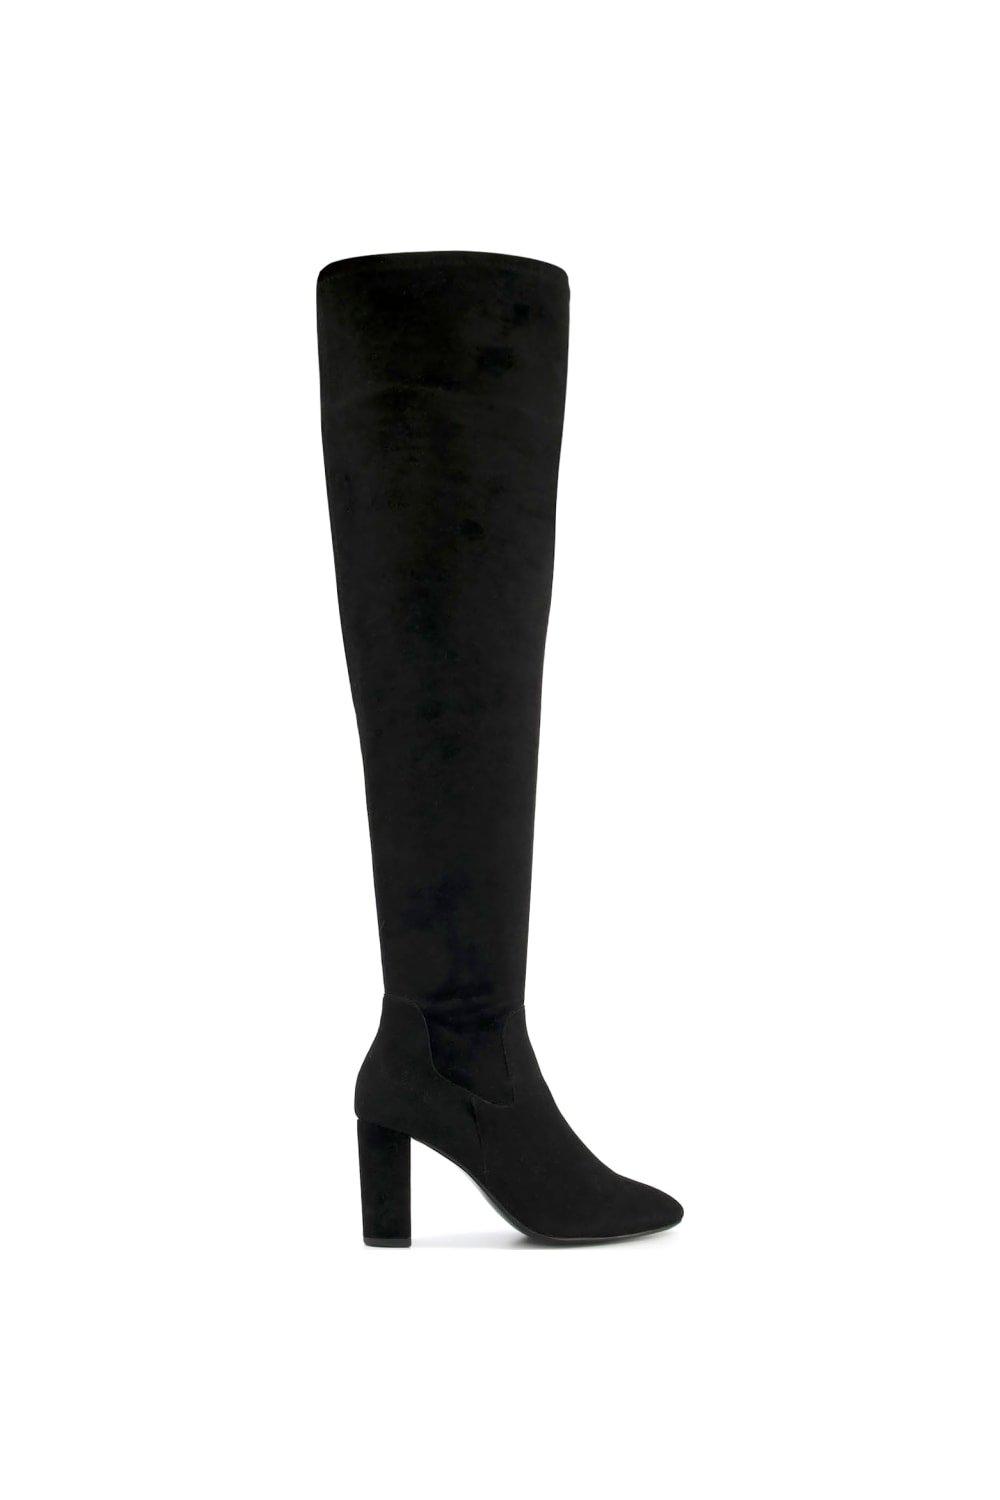 Boots | 'Syrell' Over The Knee Boots | Dune London